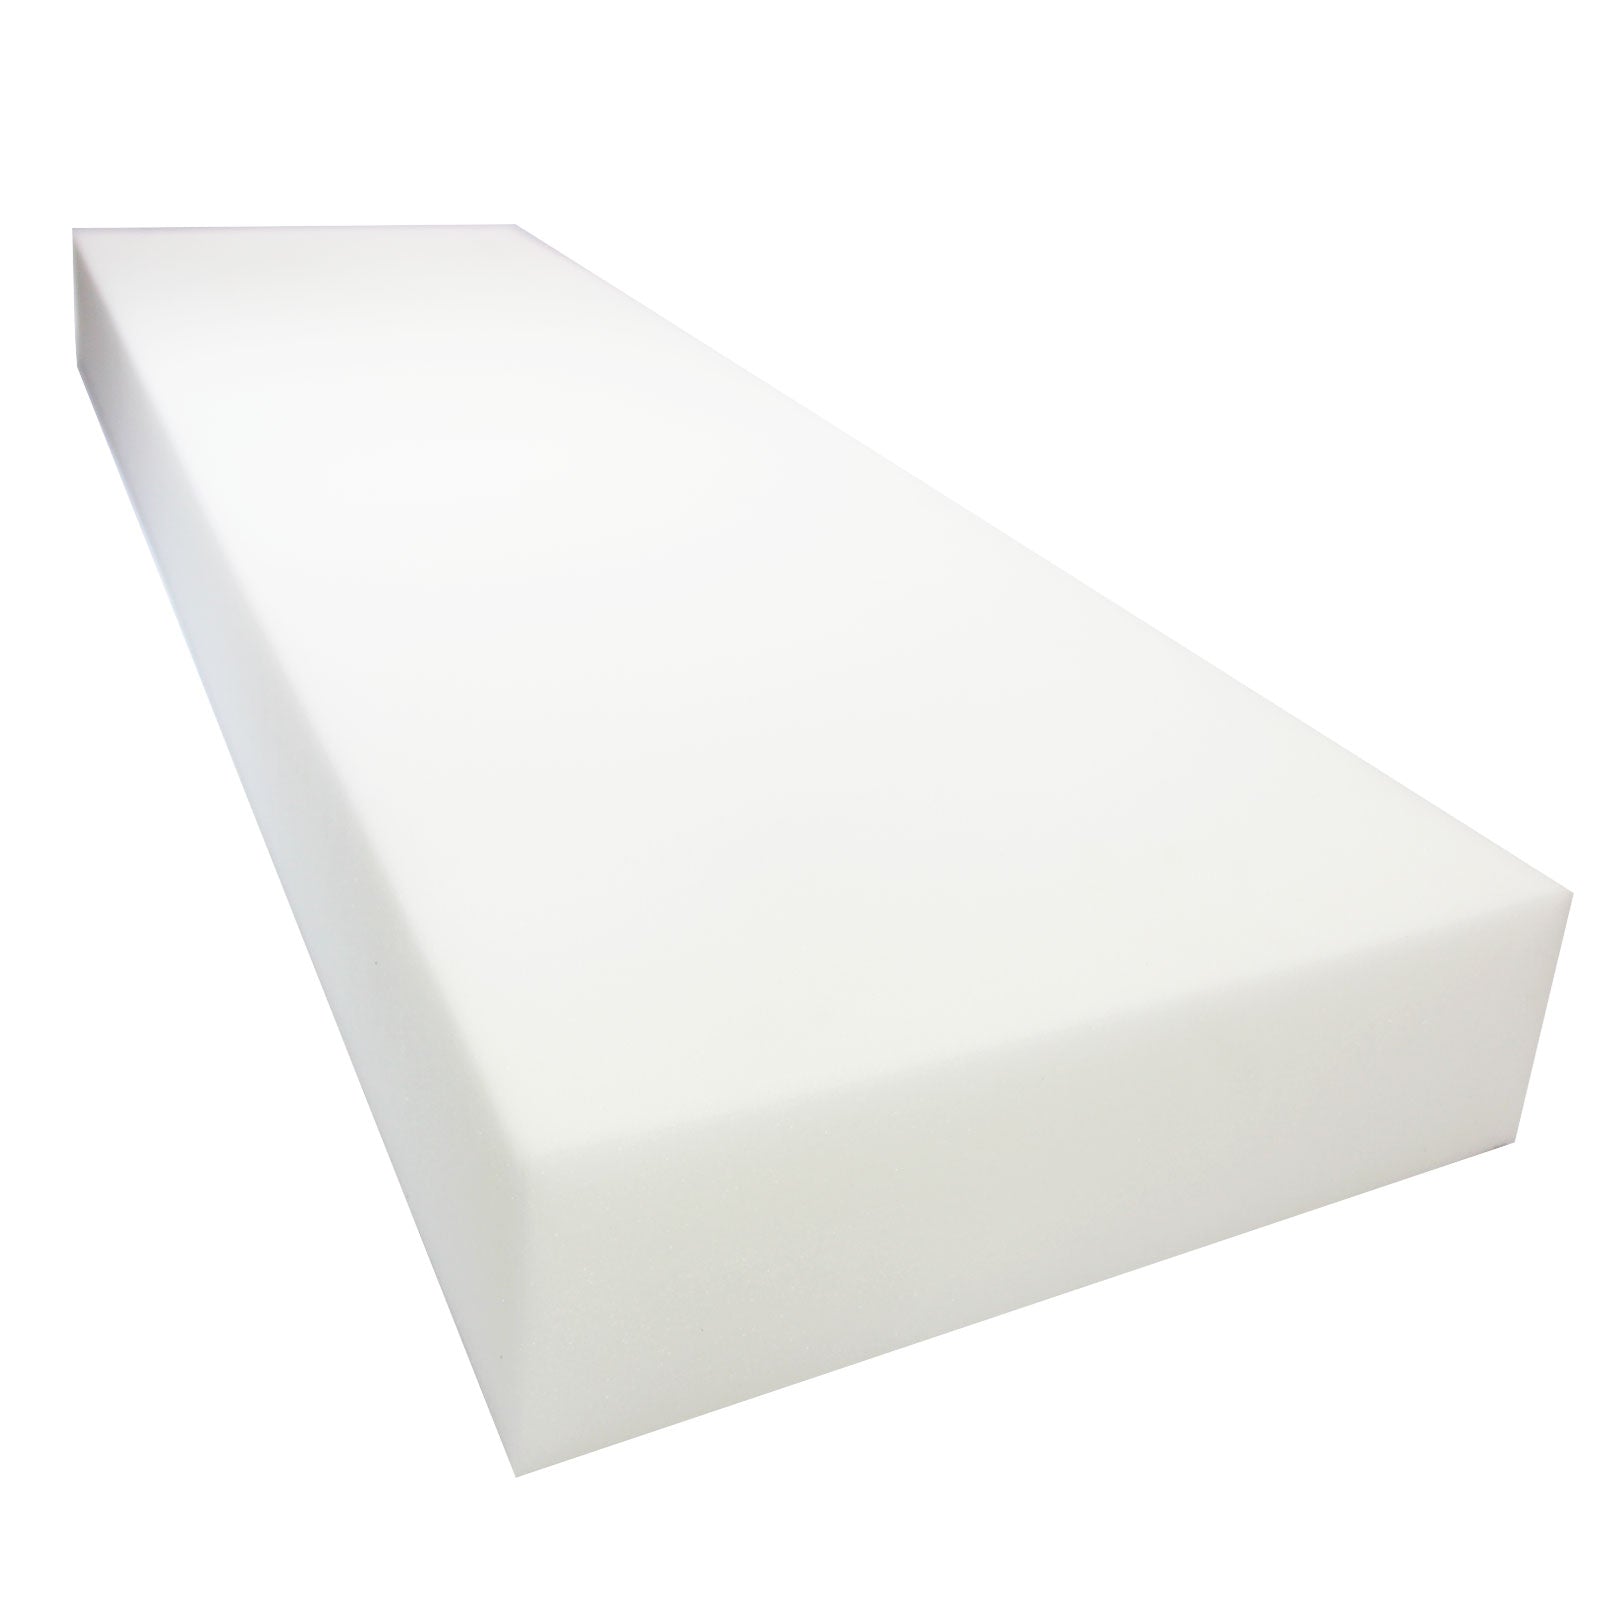 High density foam,Upholstery size 20x20 Inches 2 Inch Thick Replacement  cushions